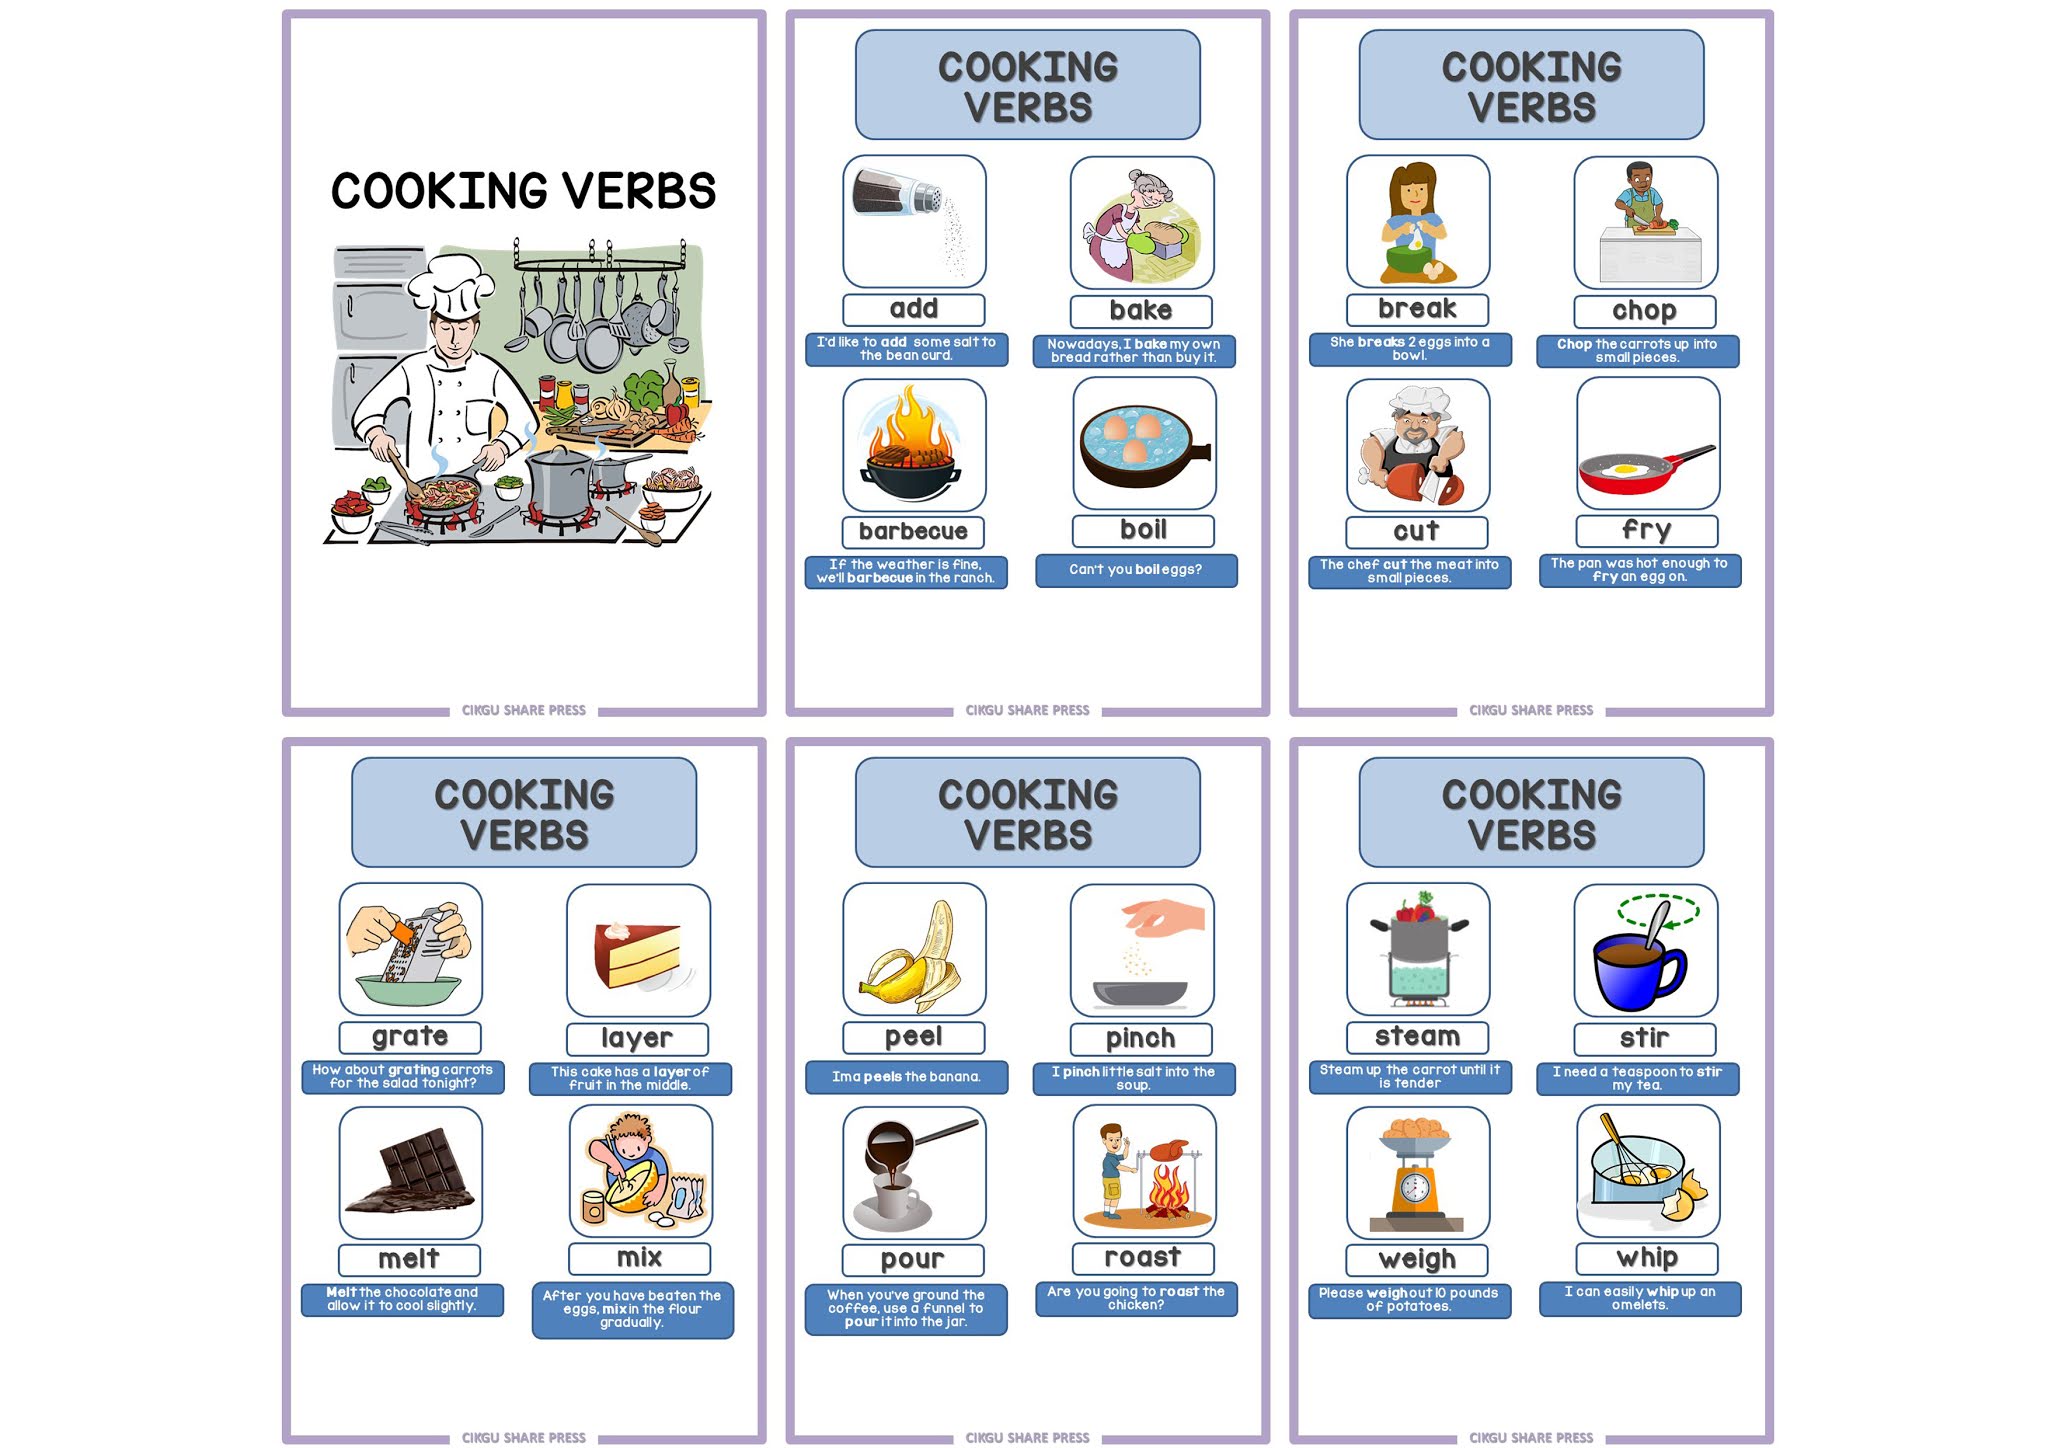 Правильная форма глагола cook. Cooking verbs Dictionary. Cooking verbs picture Dictionary. To spread Cooking verb. Worksheets how to Cook verbs.